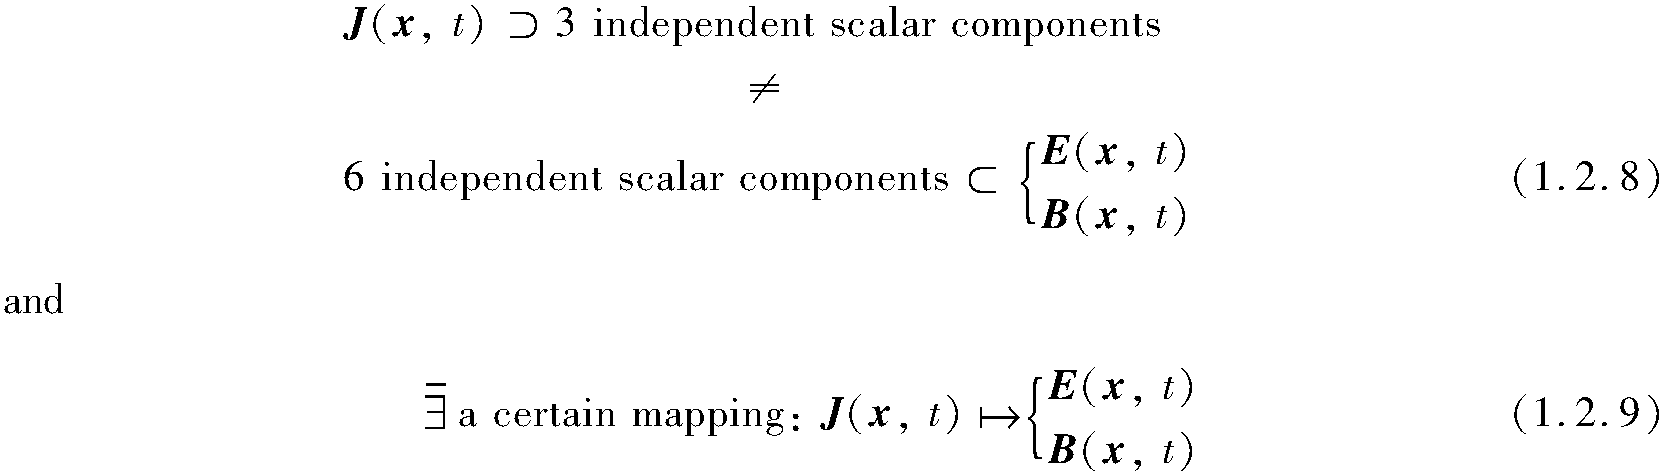 1.2.1 An initial and intuitive judgement about the incompatibility between independent and dependent variables